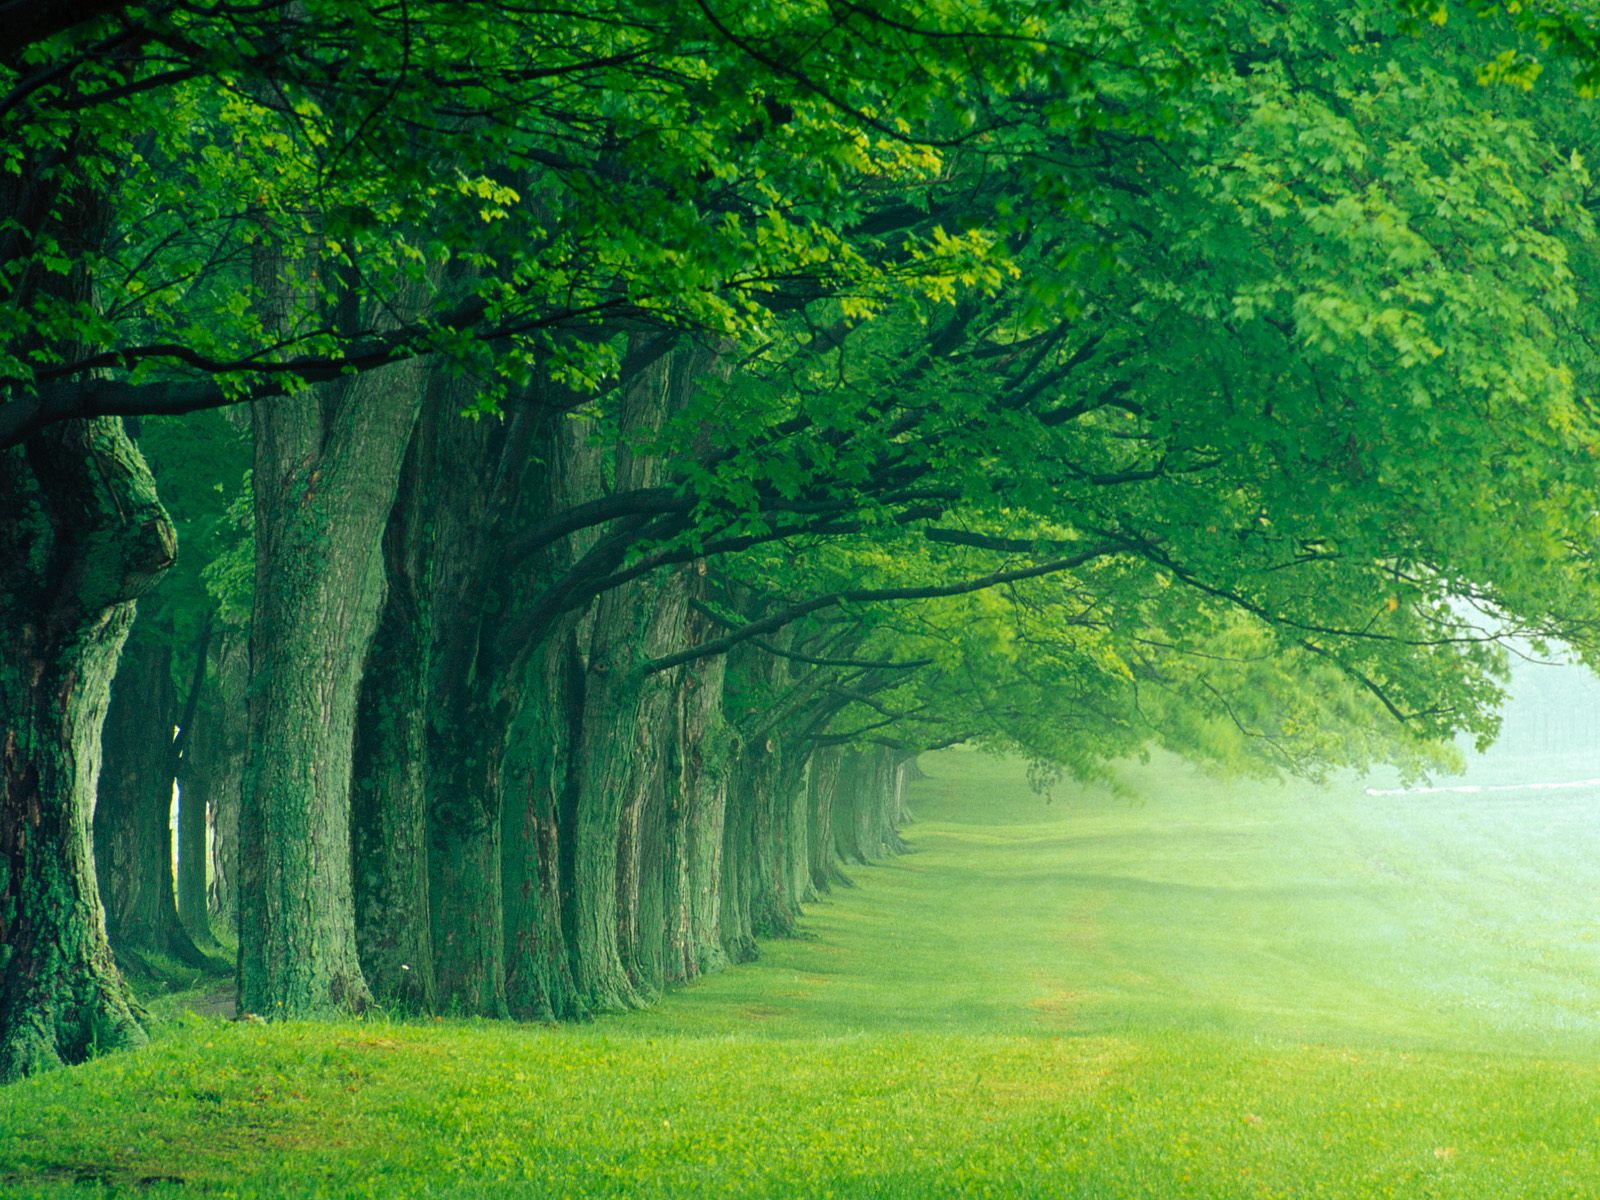 Download Desktop Wallpaper Field With A Tree Planting